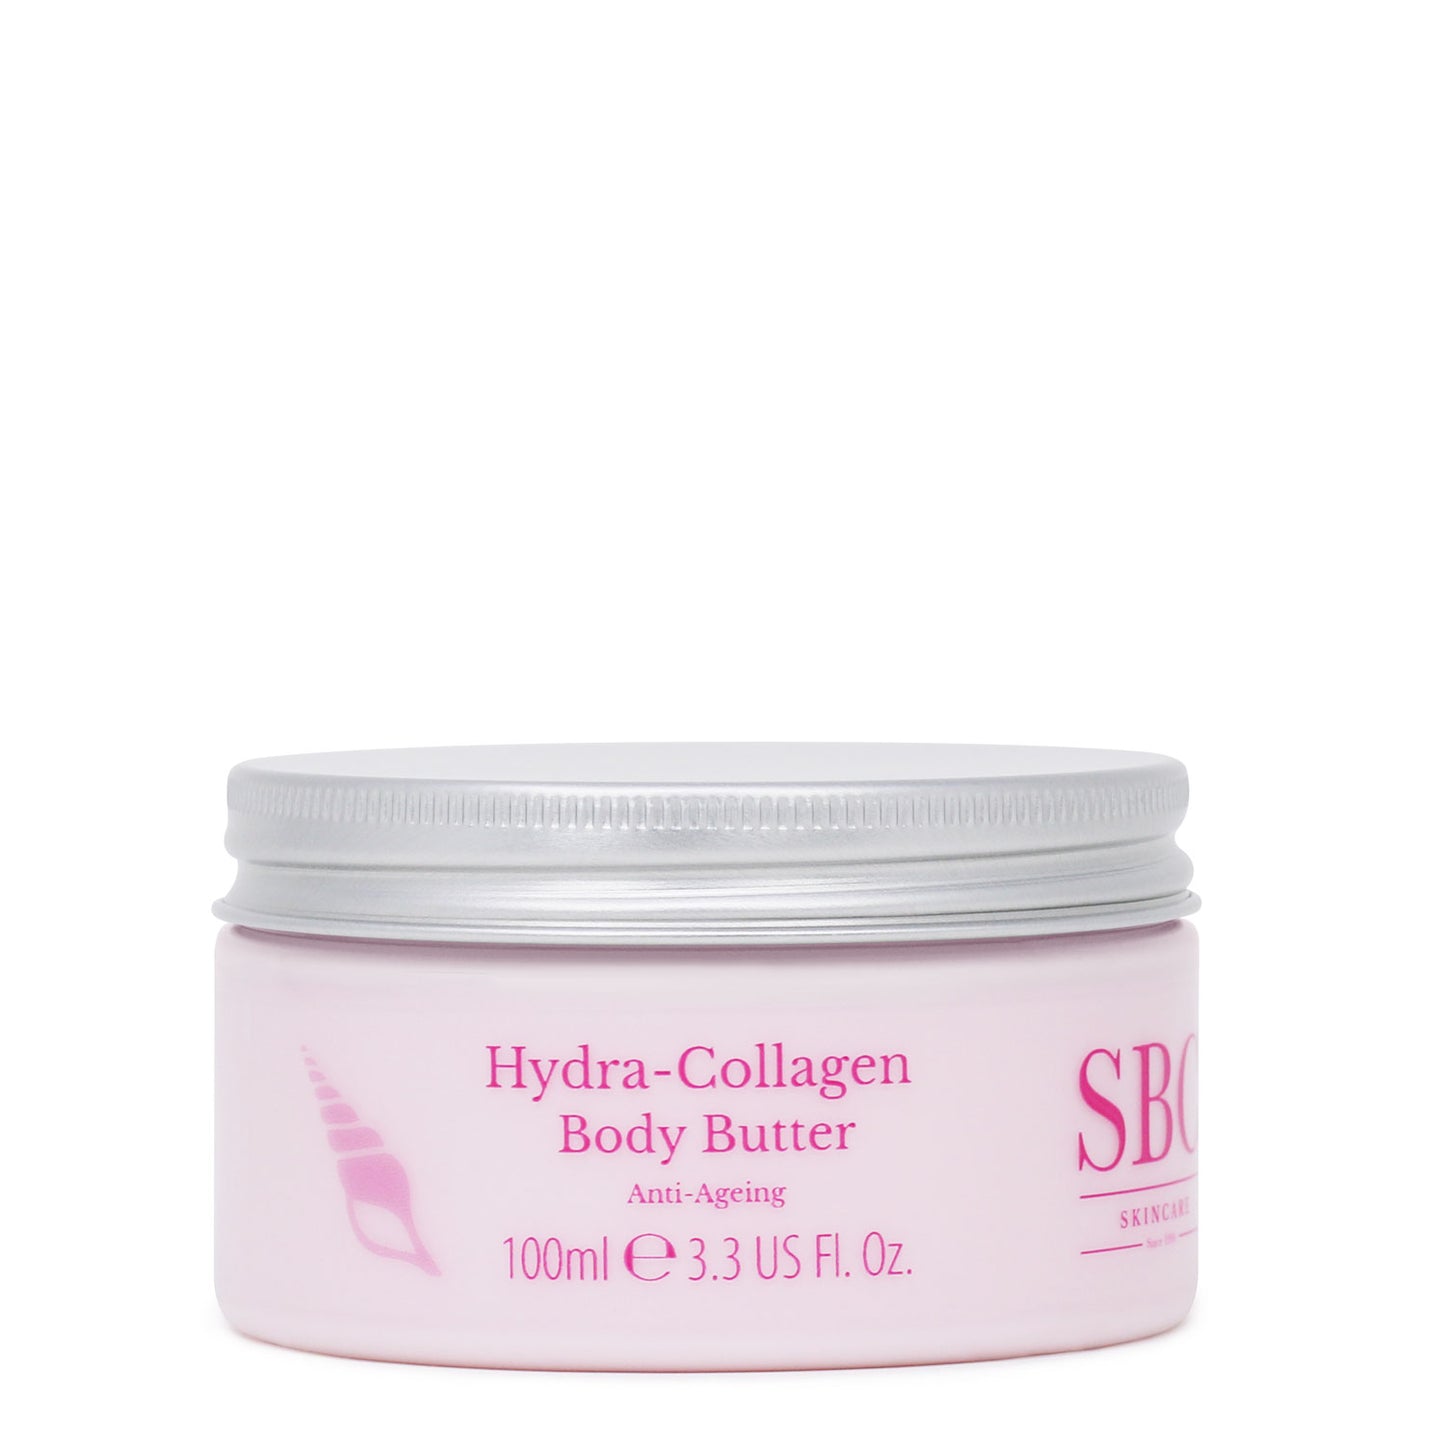 100ml Hydra-Collagen Body Butter on a white background